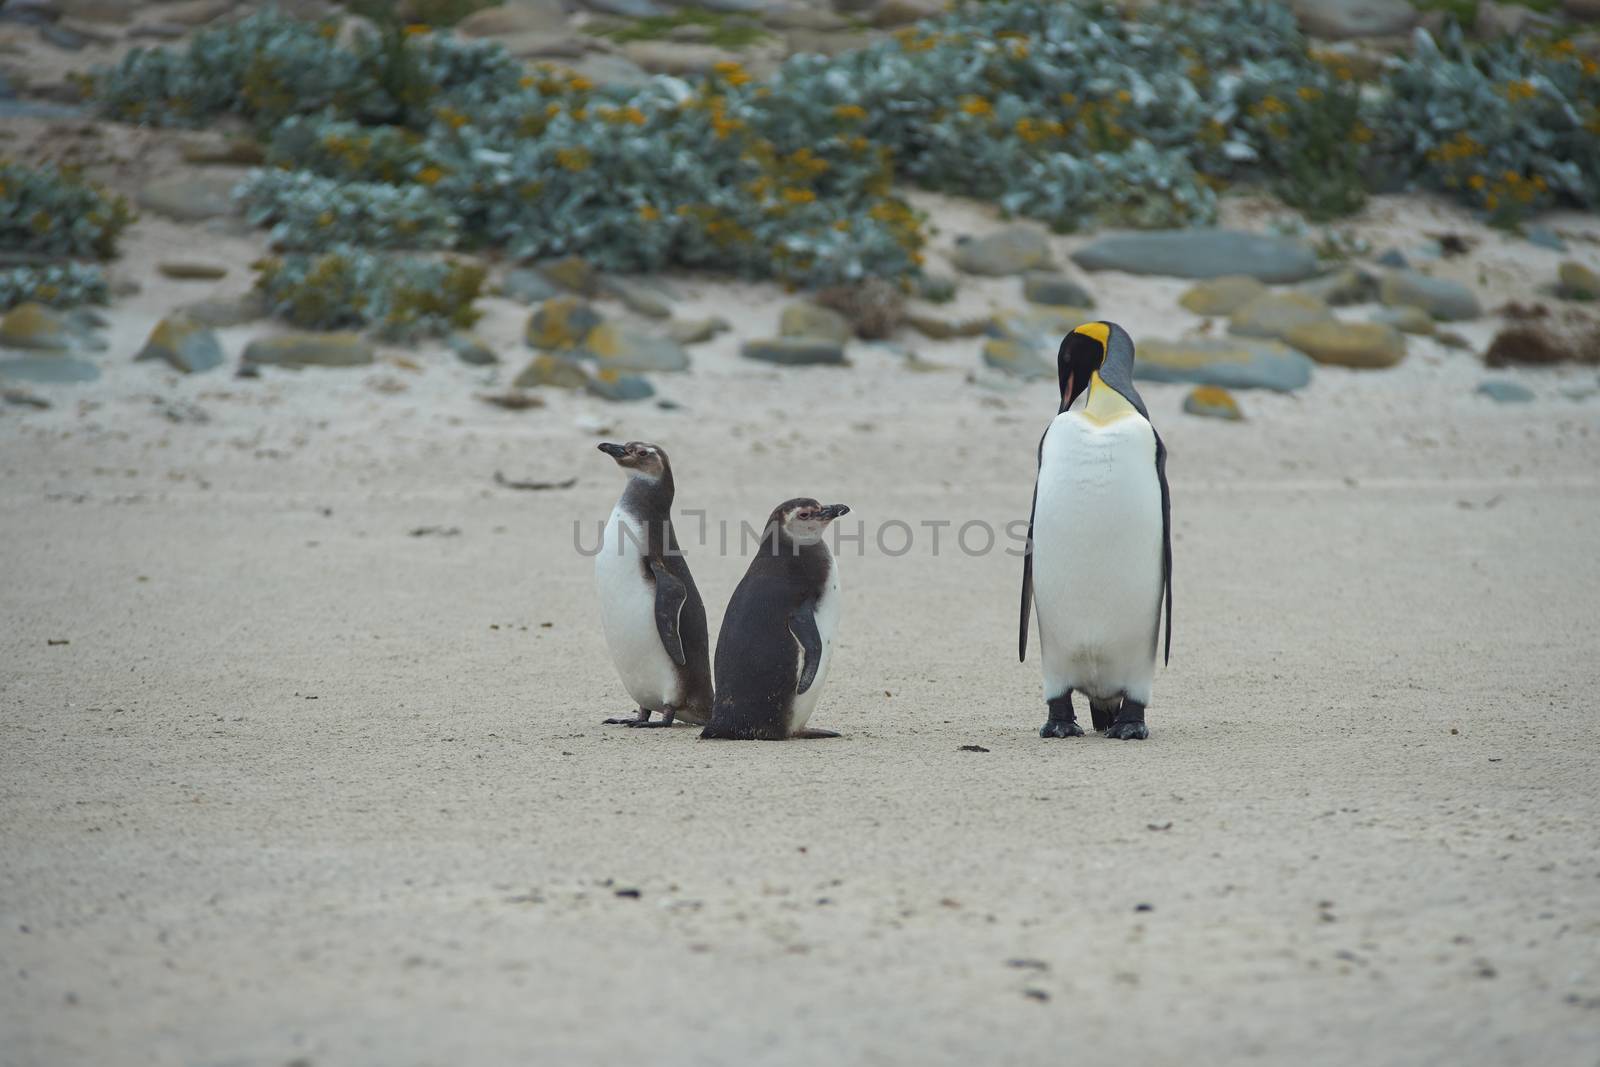 When I grow up I want to be a King Penguin by JeremyRichards